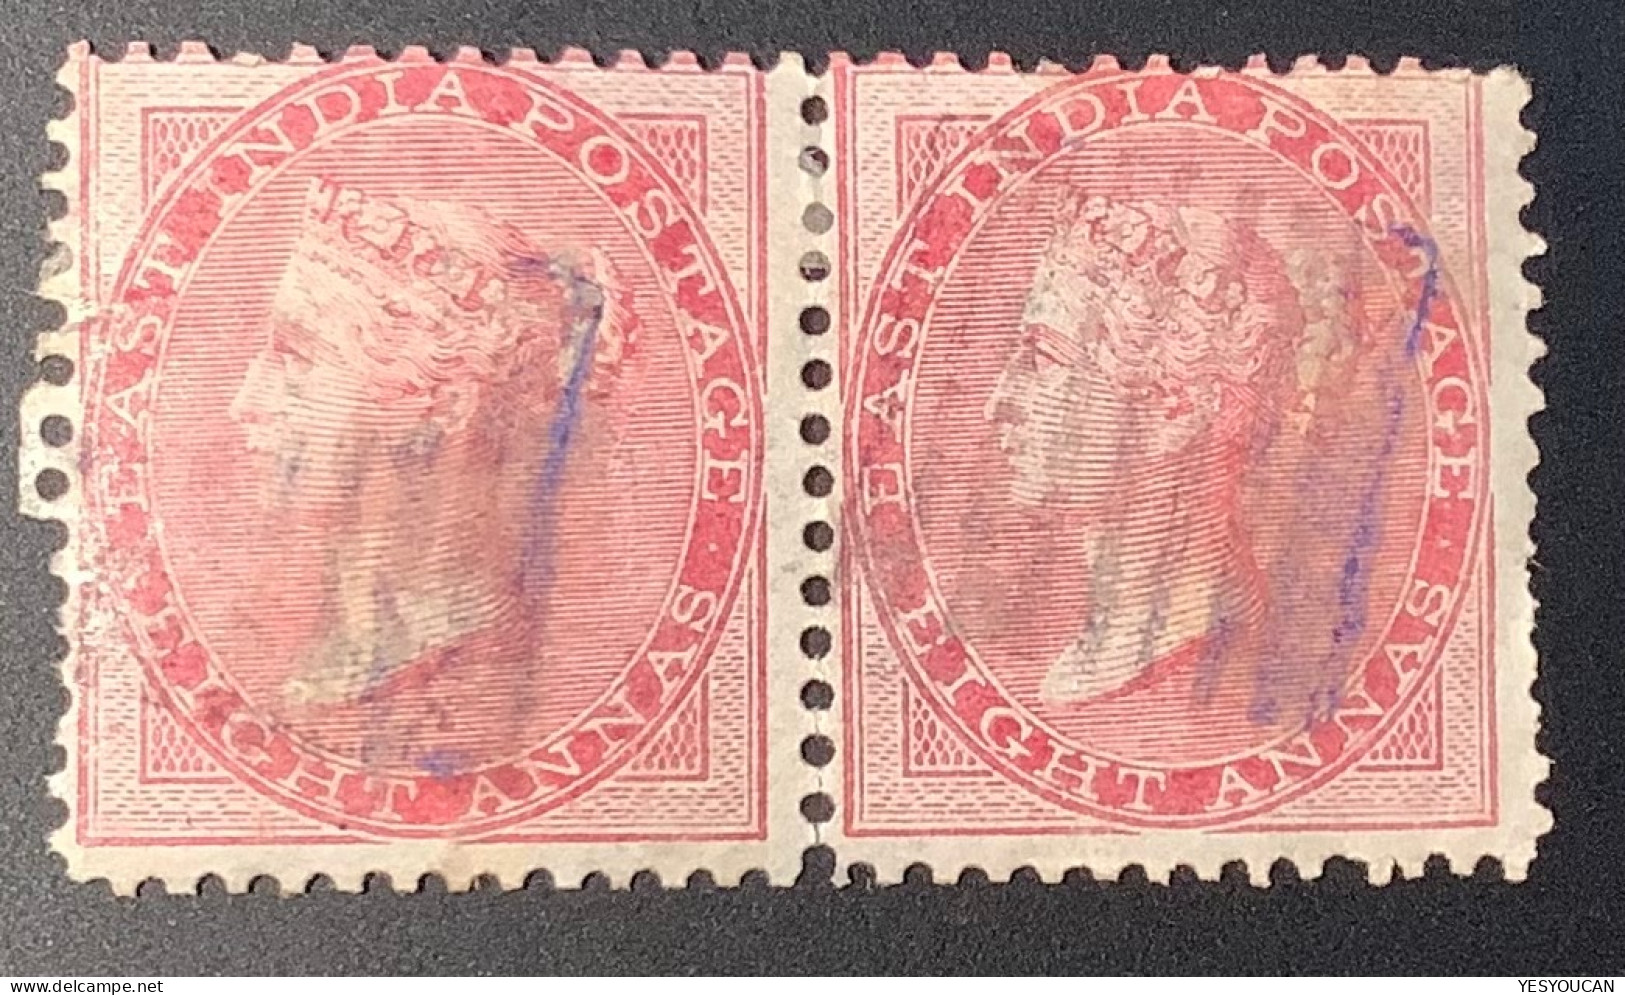 India 1865 SG 65 = 190£++ 8a Carmine Pair With Rare Variety Shifted Elefant Wmk F-VF With Scarce Pmk (Queen Victoria - 1858-79 Crown Colony